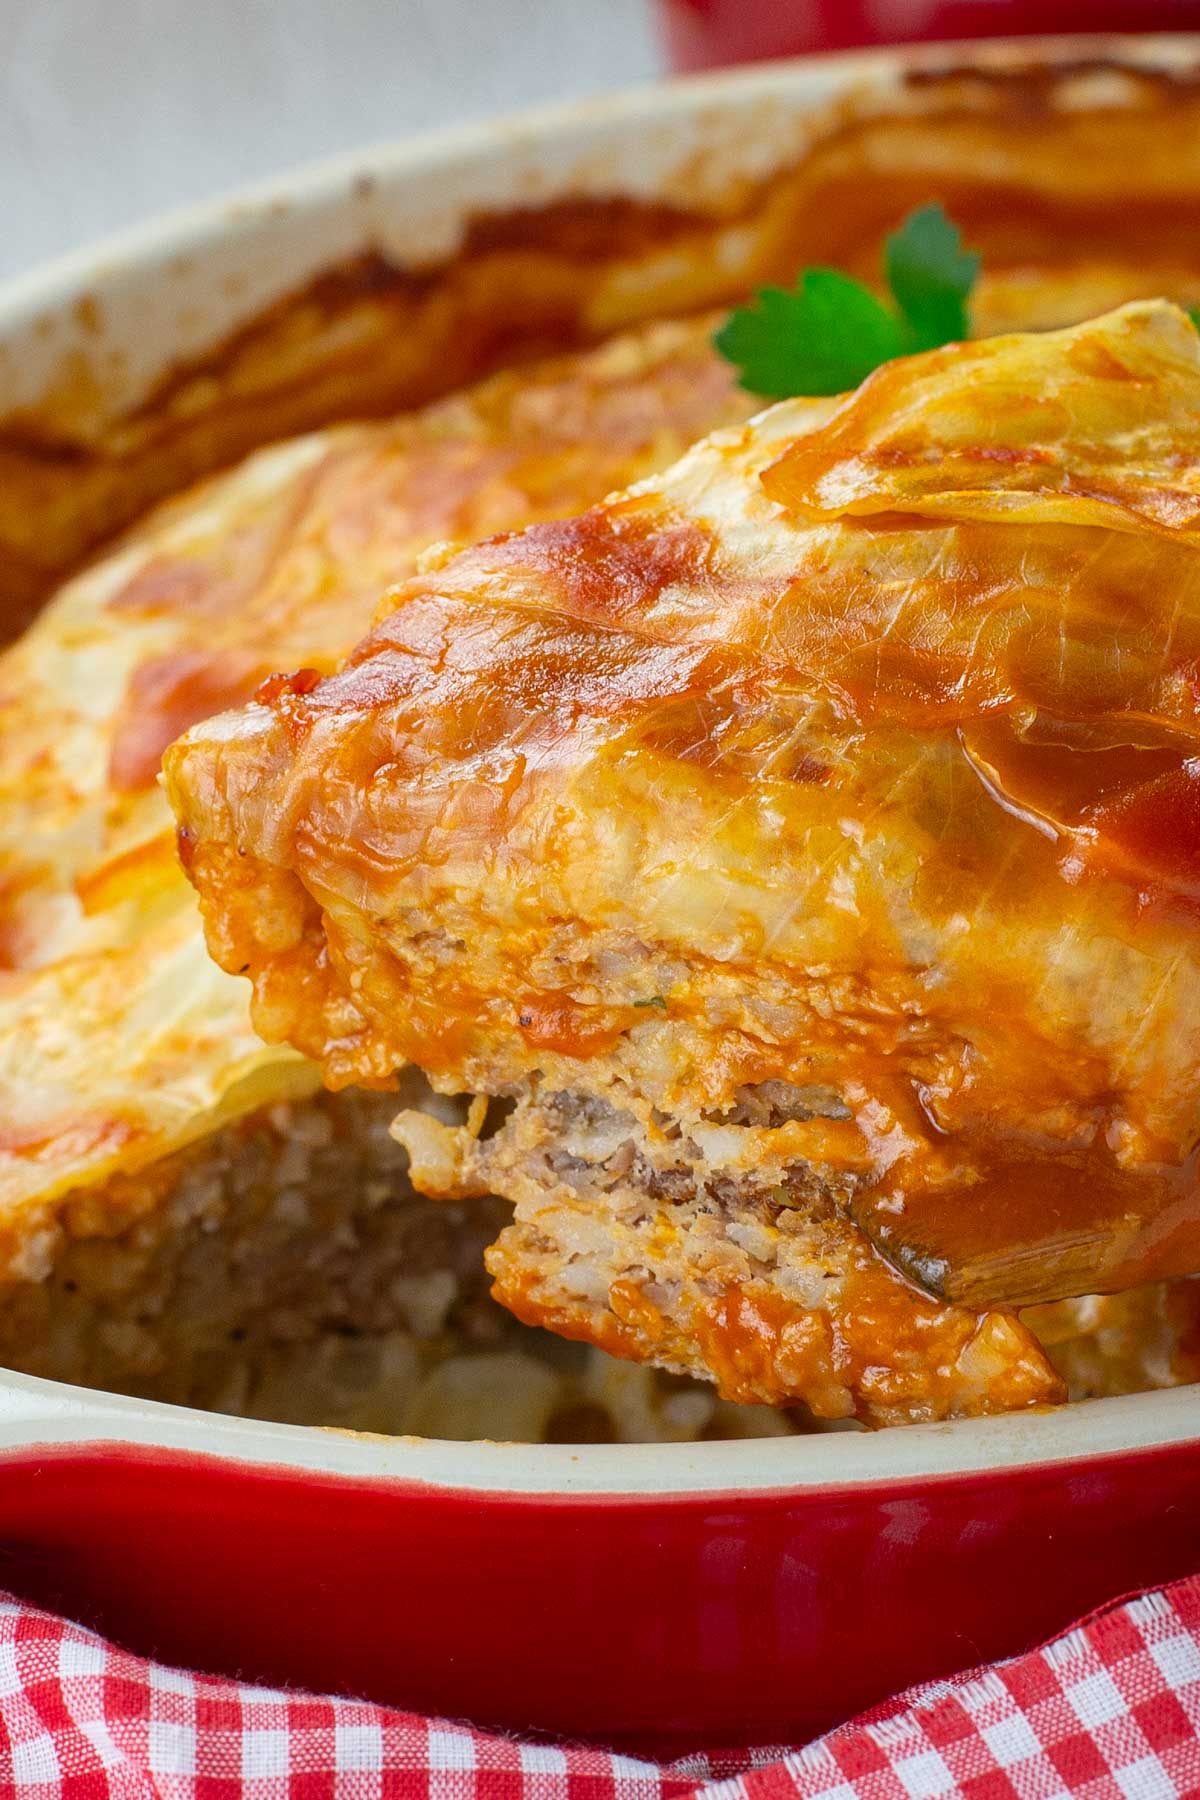 Red baking dish of baked turkey cabbage roll casserole.